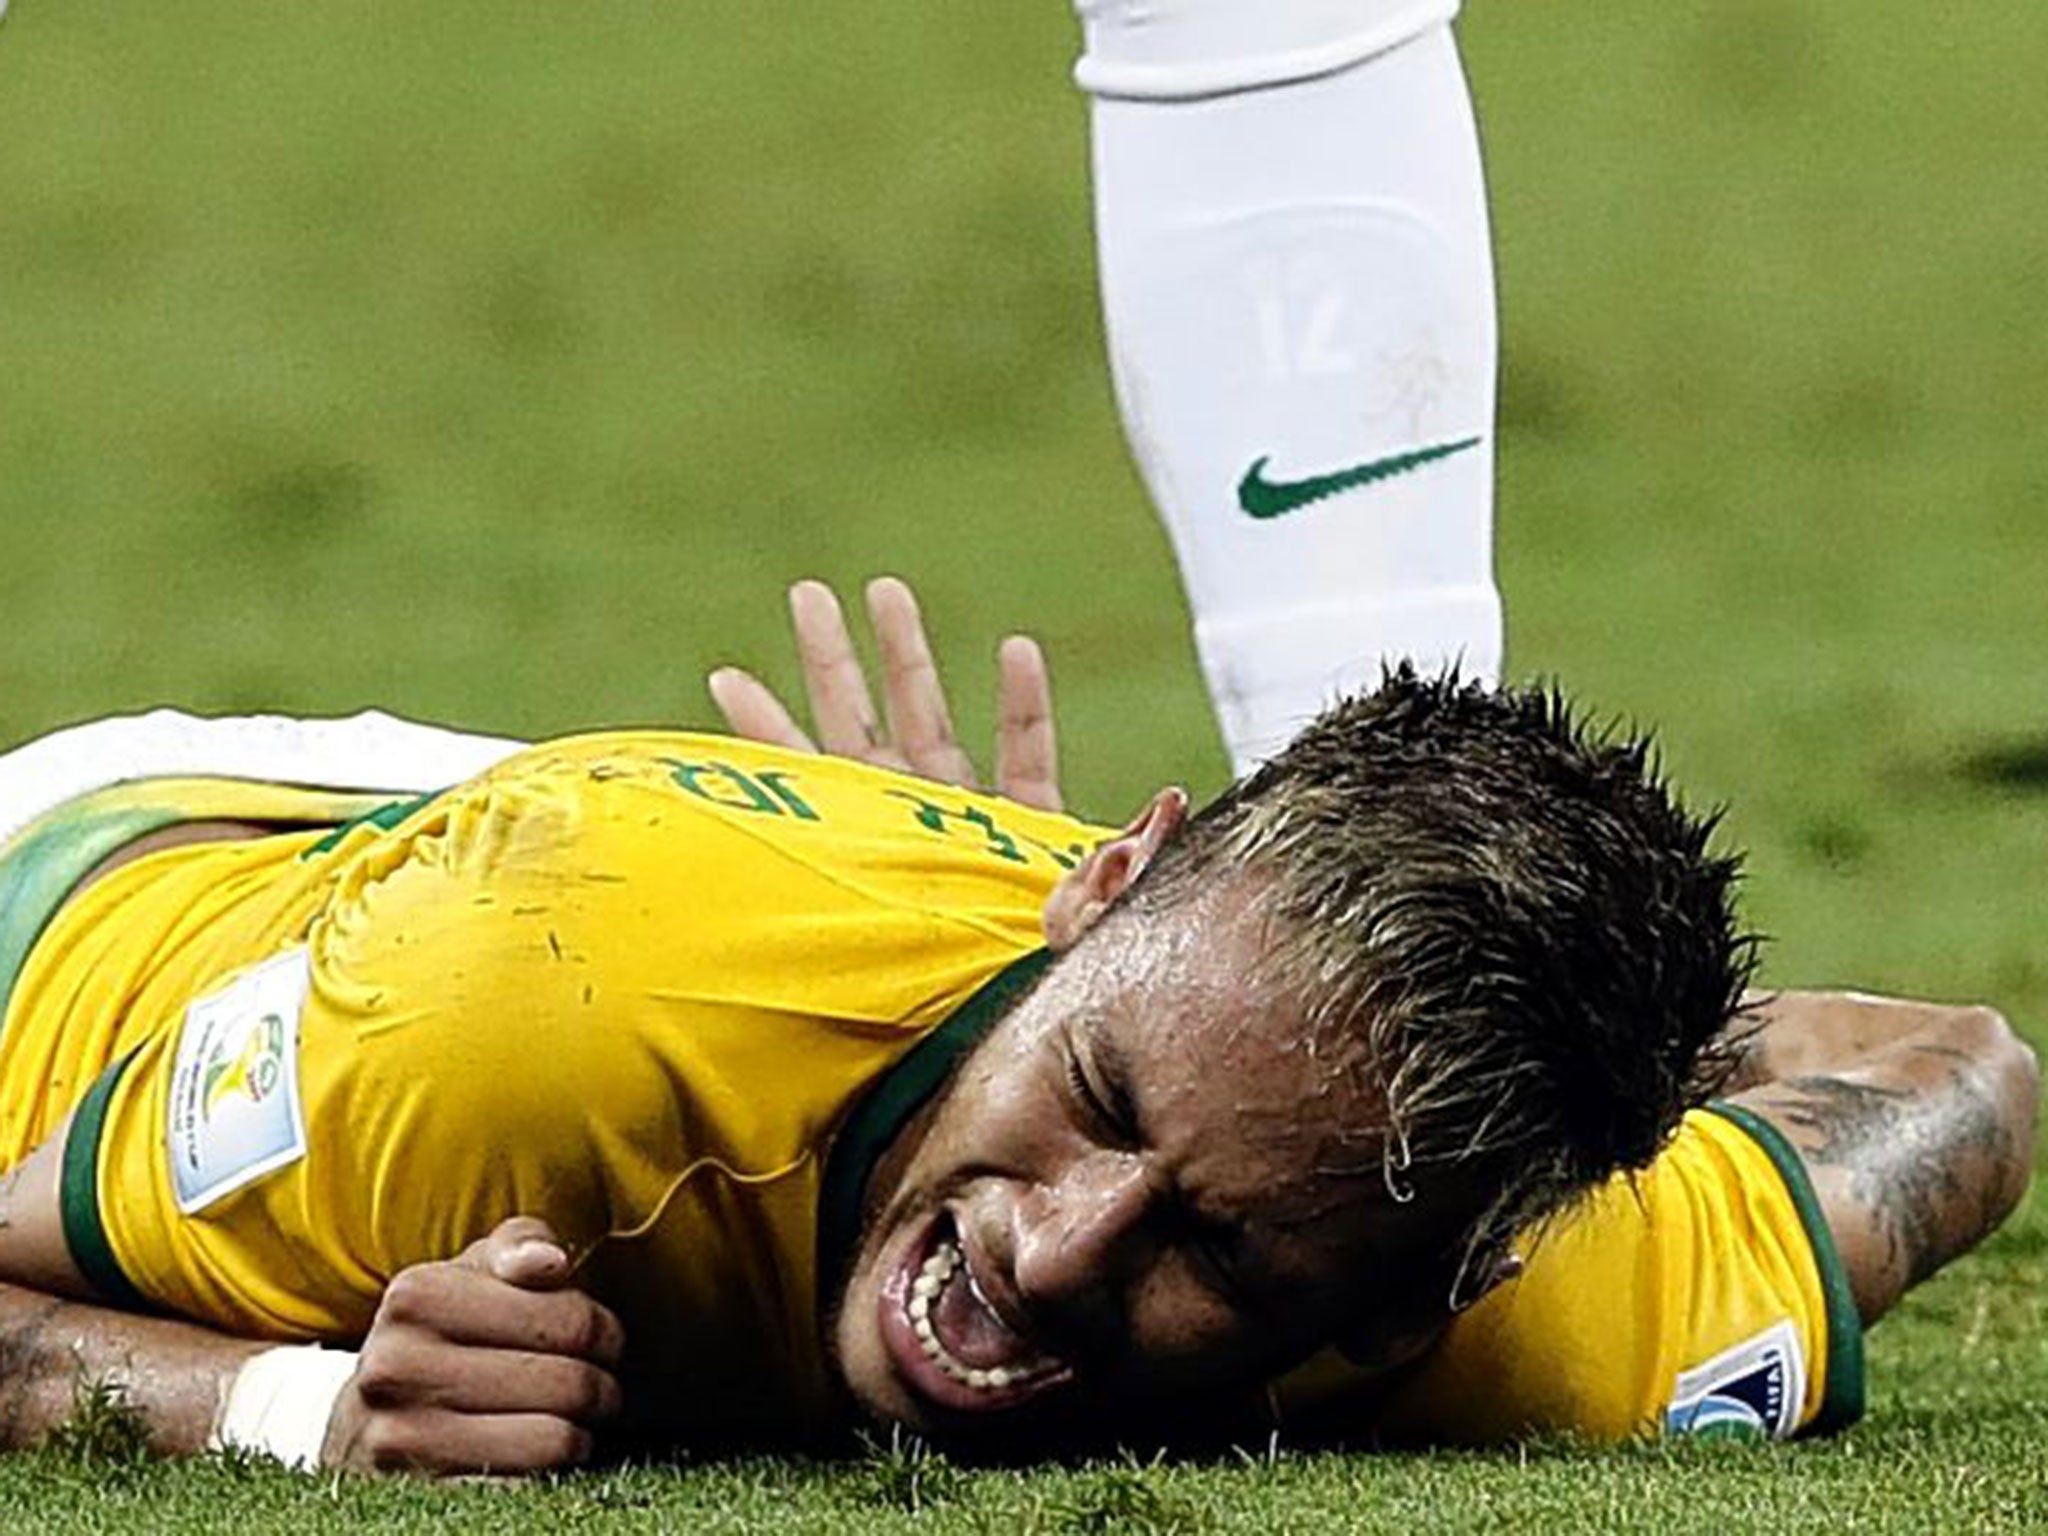 Neymar feels the pain of the challenge that put him out of the World Cup